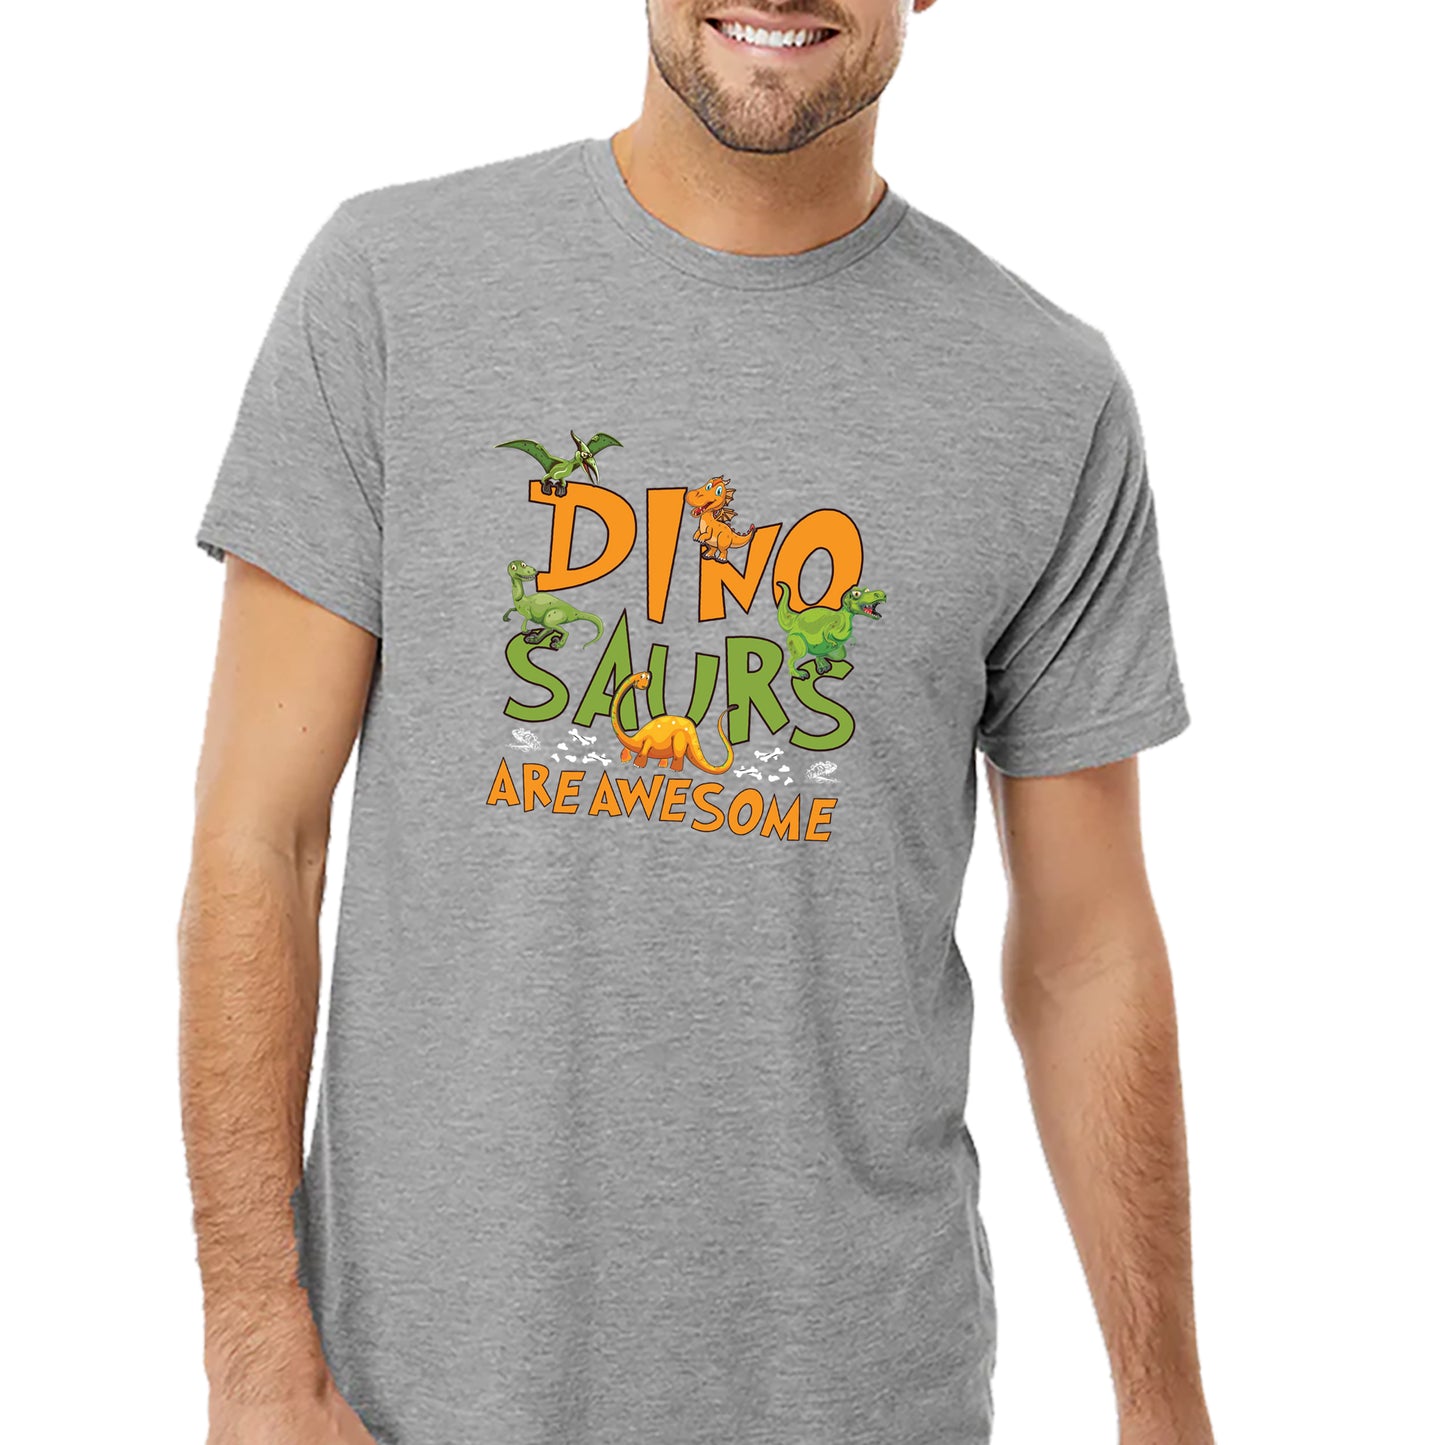 Dinosaurs Are Awesome T-shirt